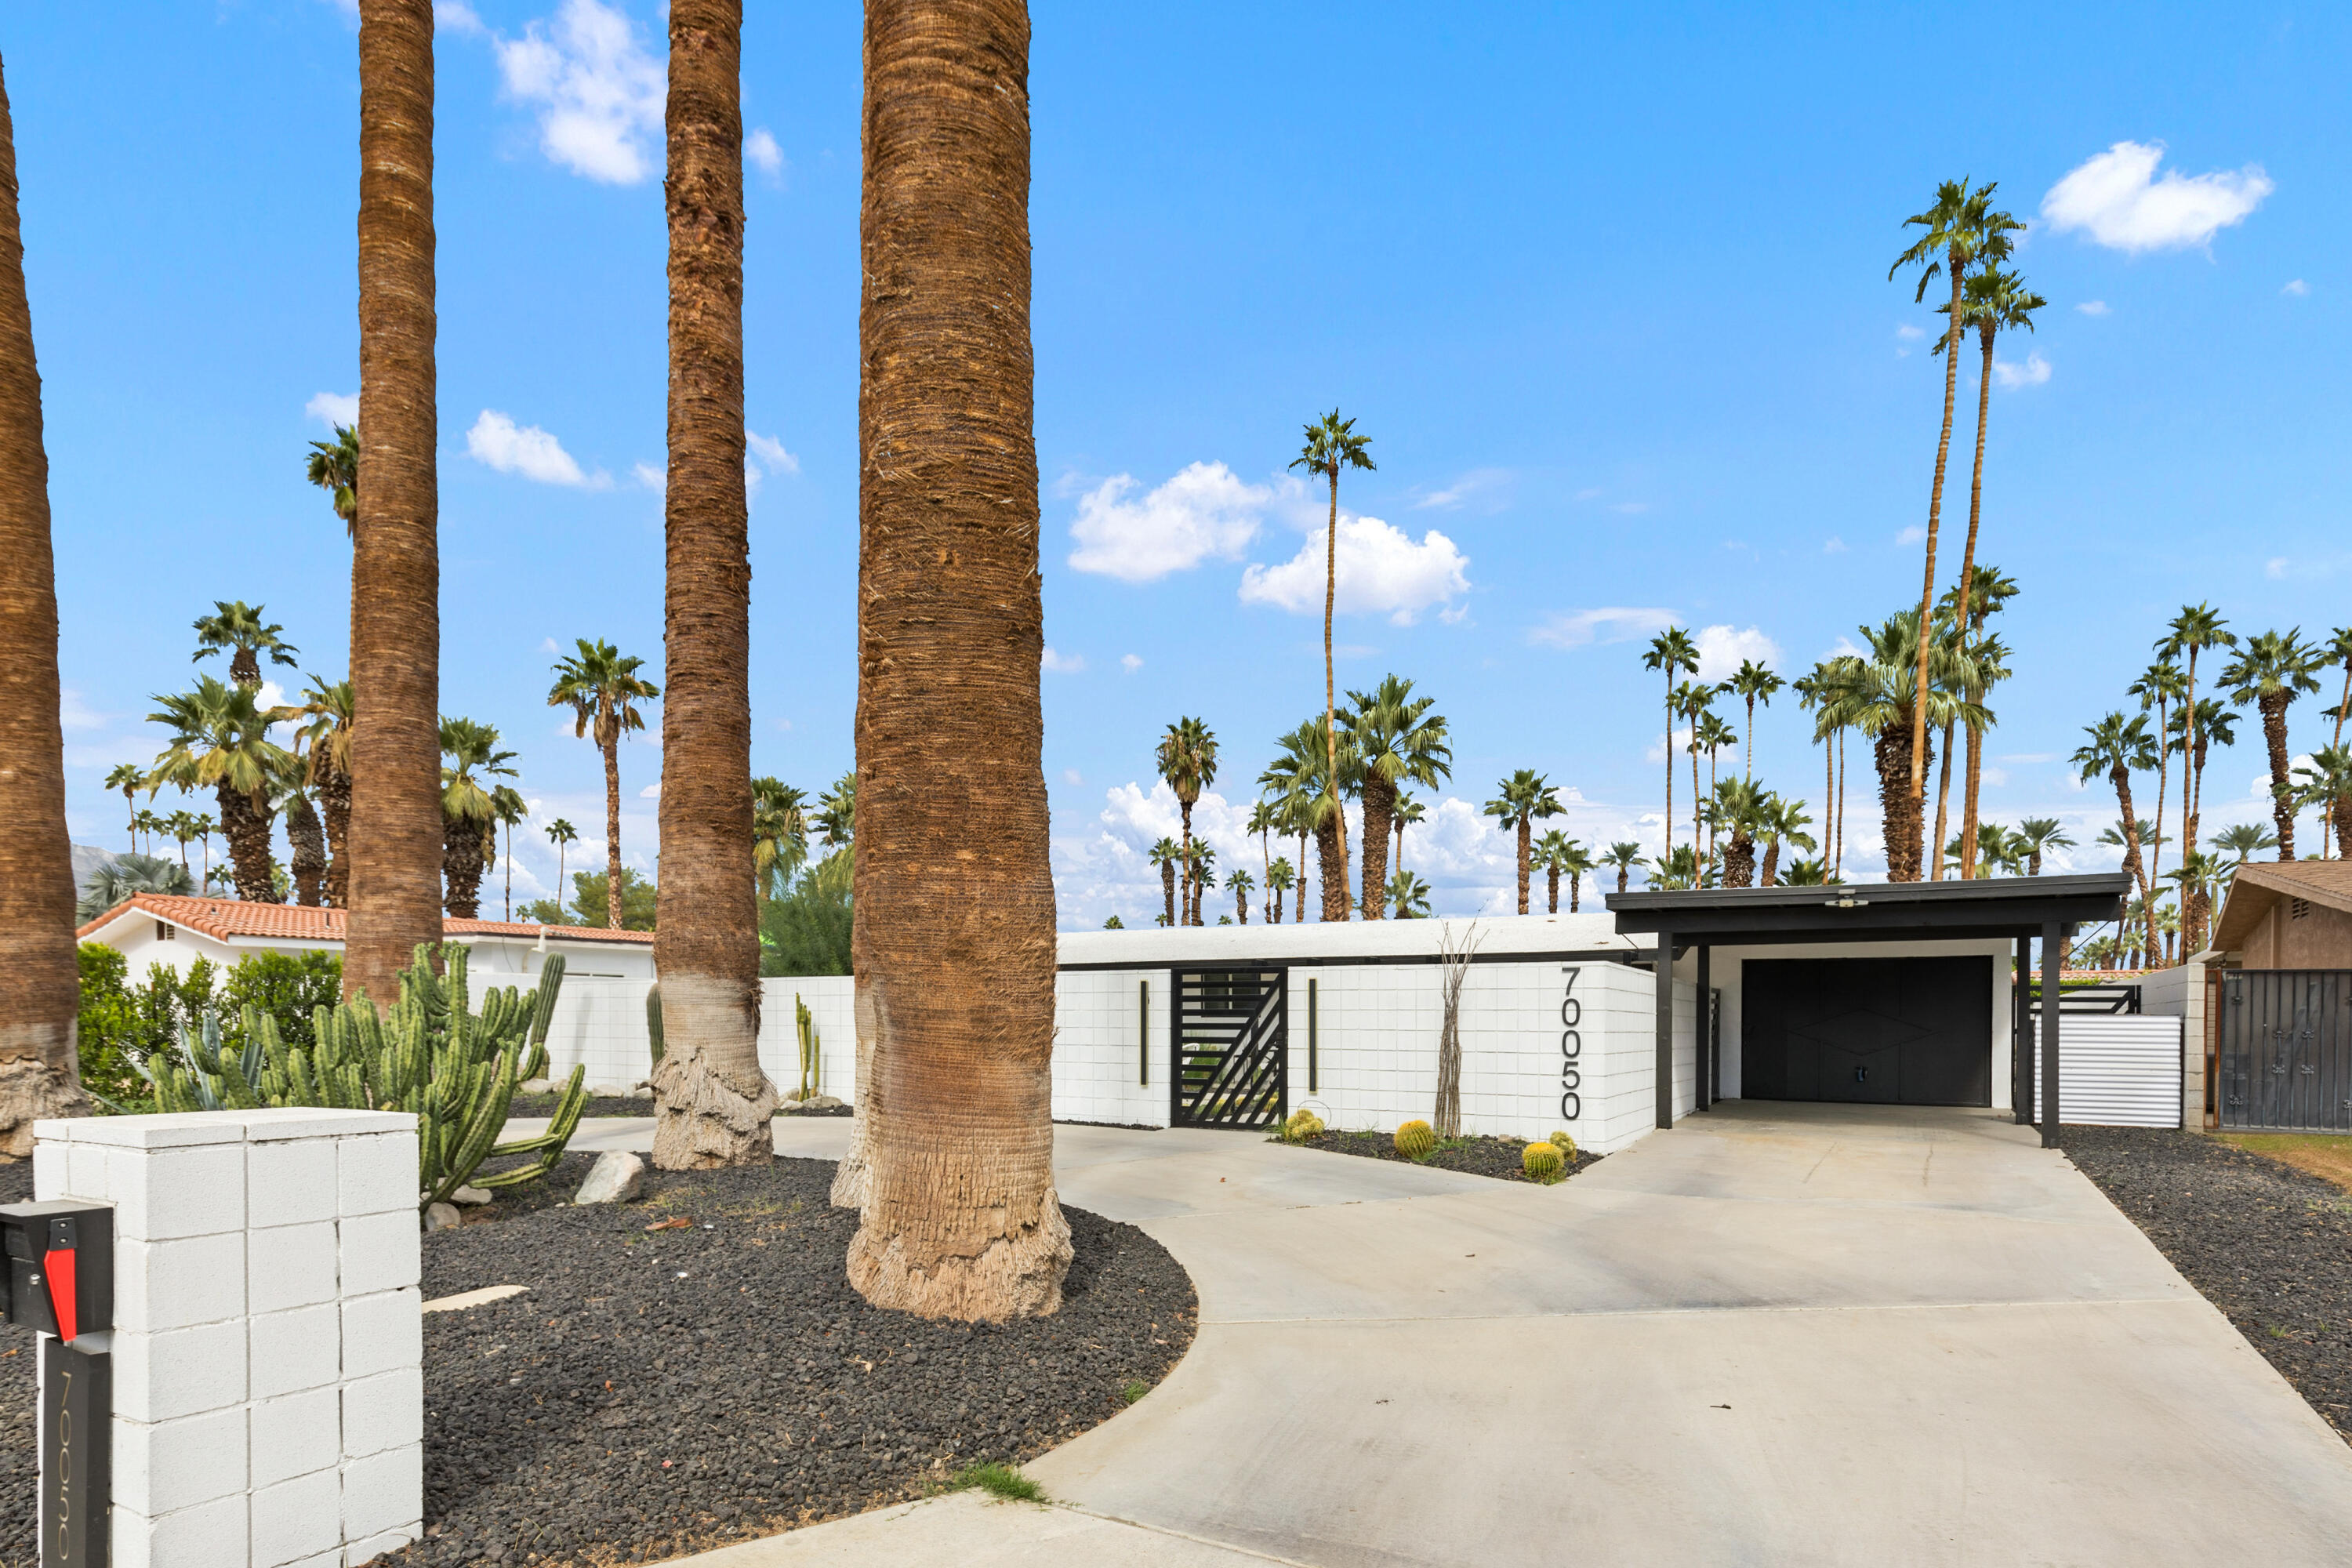 70050 Chappel Road, Rancho Mirage, California, 92270, United States, 3 Bedrooms Bedrooms, ,3 BathroomsBathrooms,Residential,For Sale,70050 Chappel Road,1498675